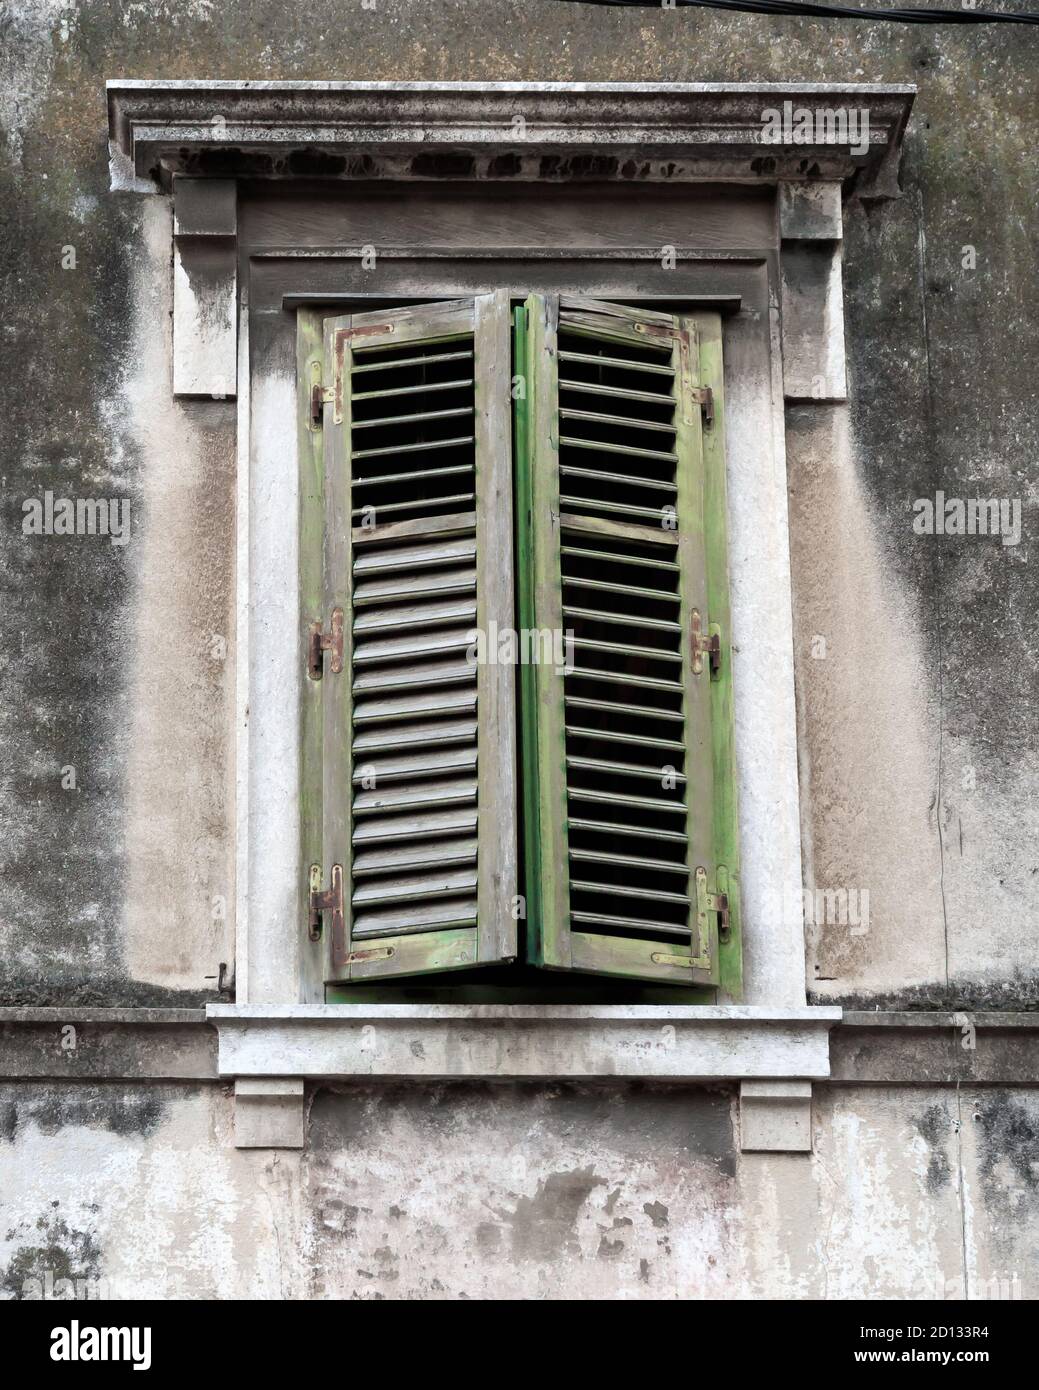 SPLIT, CROATIA - 2017 AUGUST 15. Old brick house with windows protected by closed green wooden shutters. Stock Photo